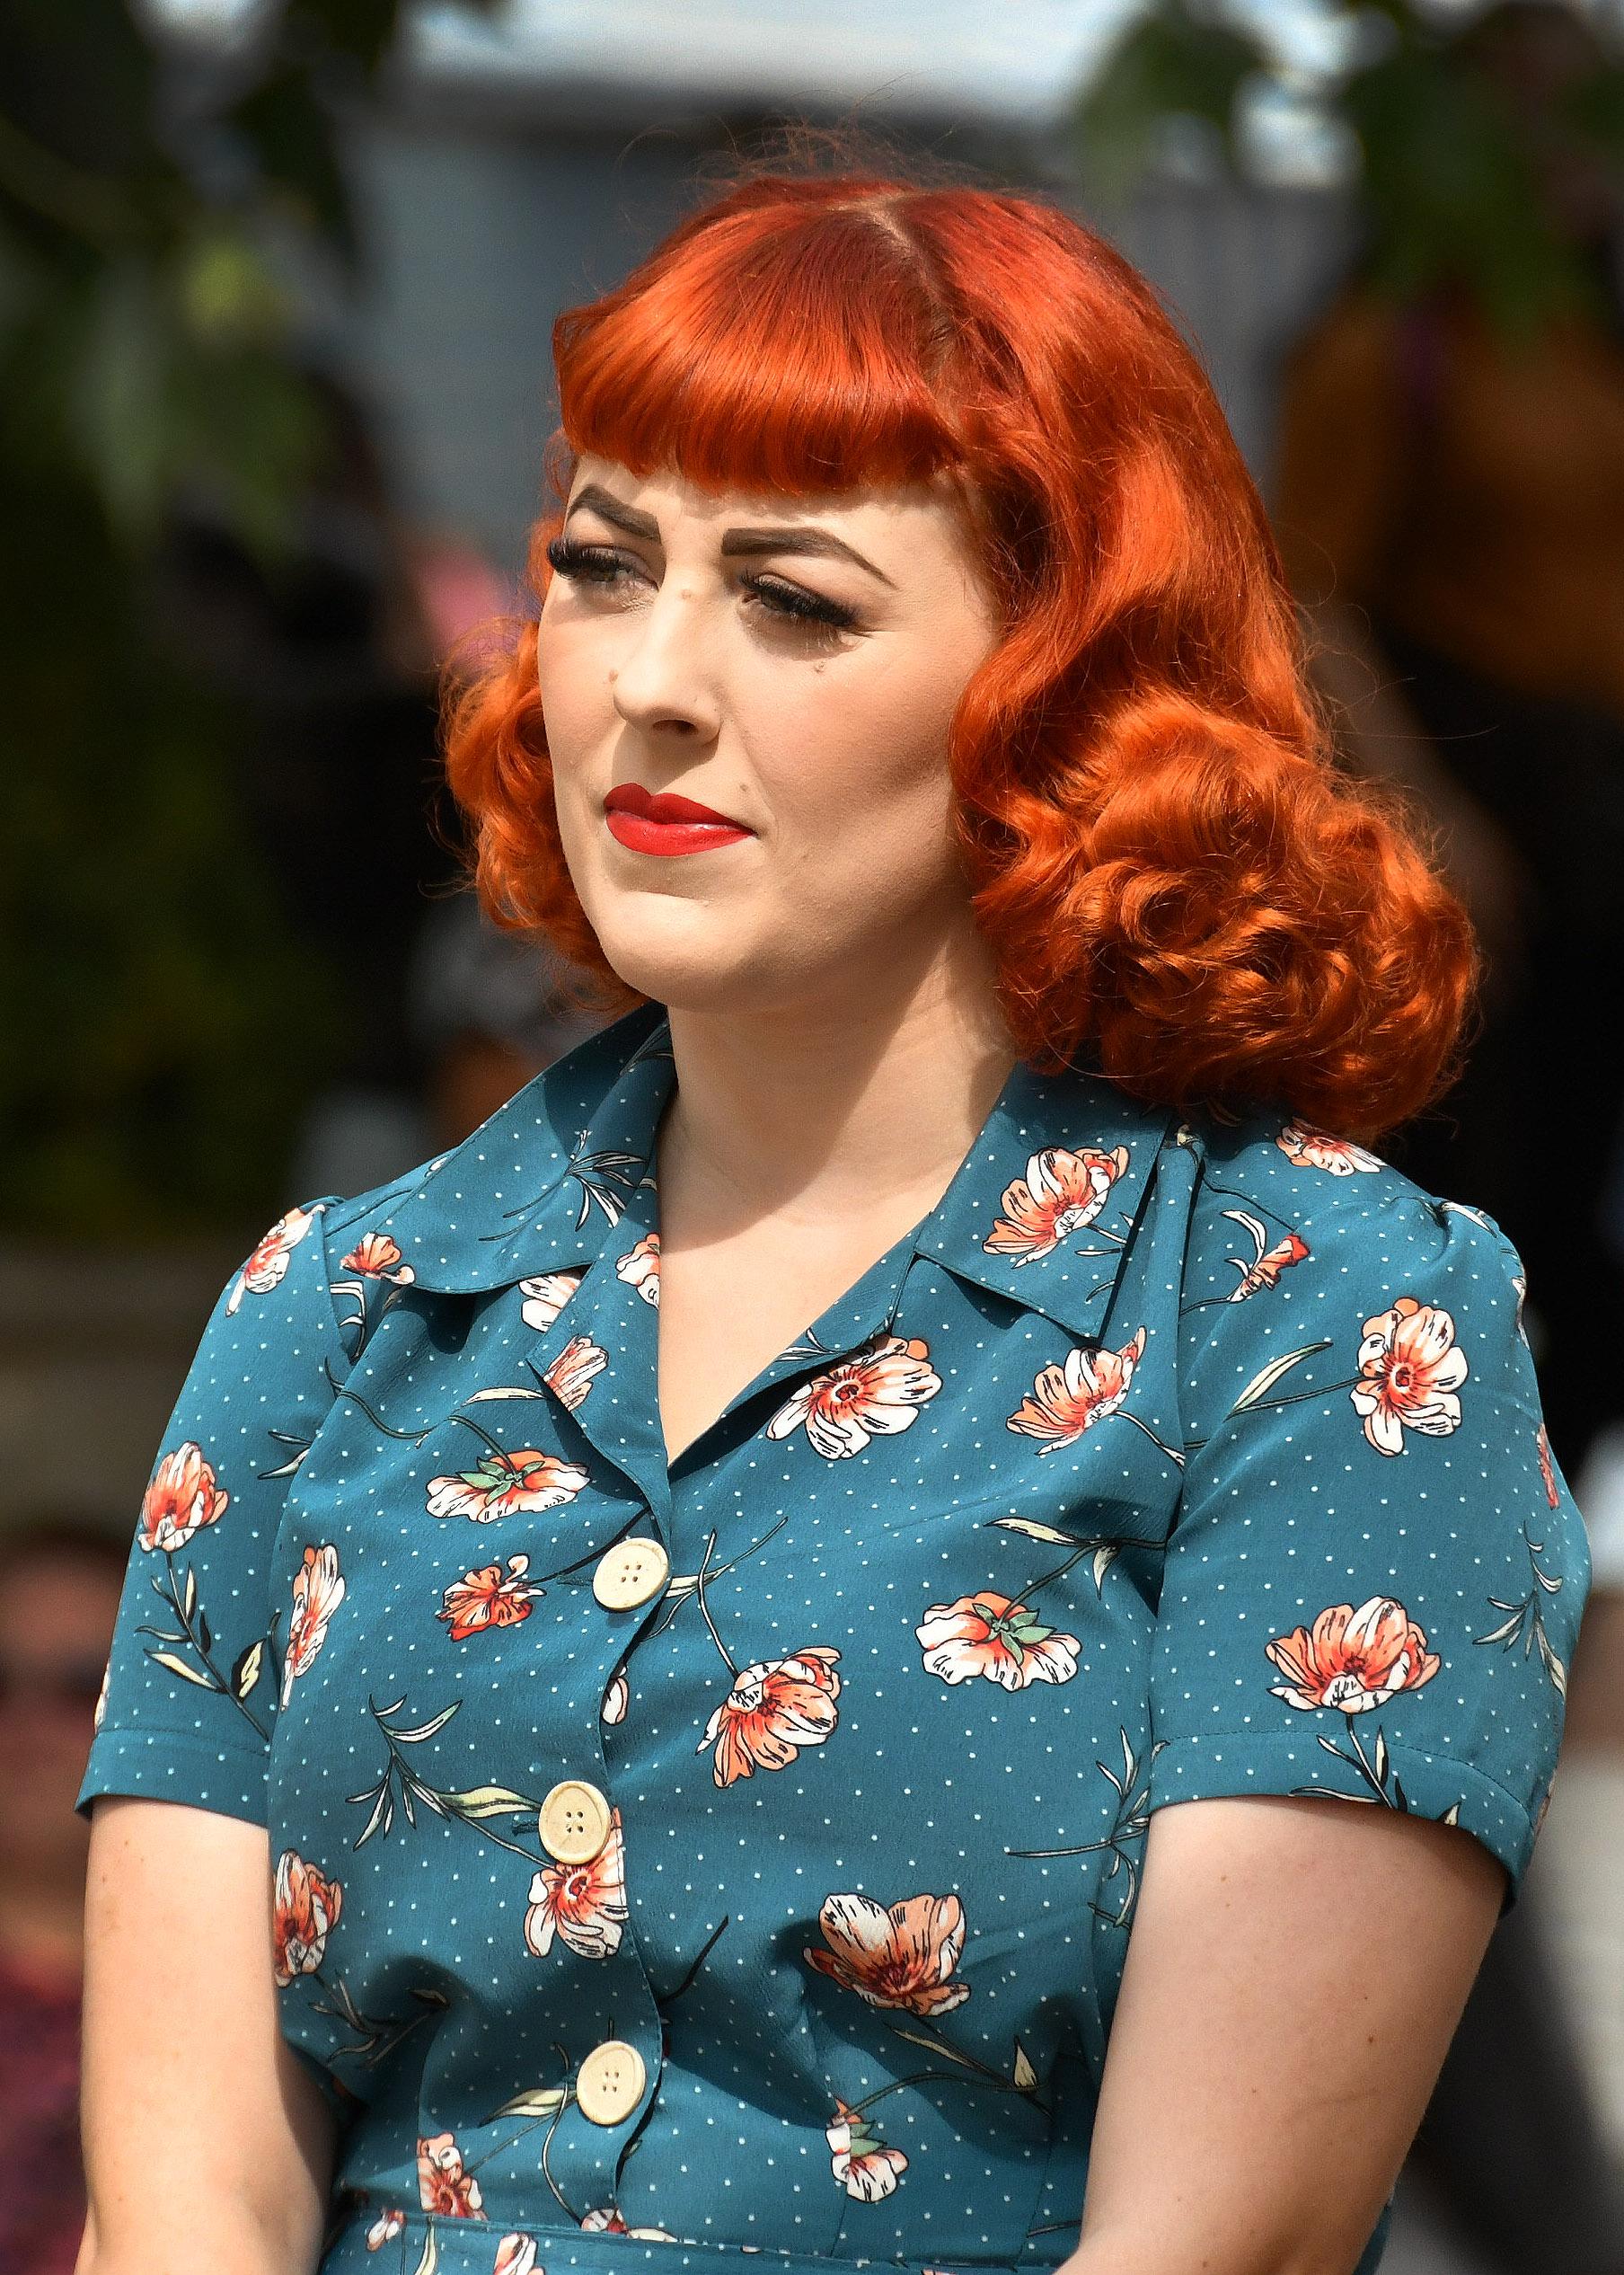 Woman dressed in vintage 1940s attire